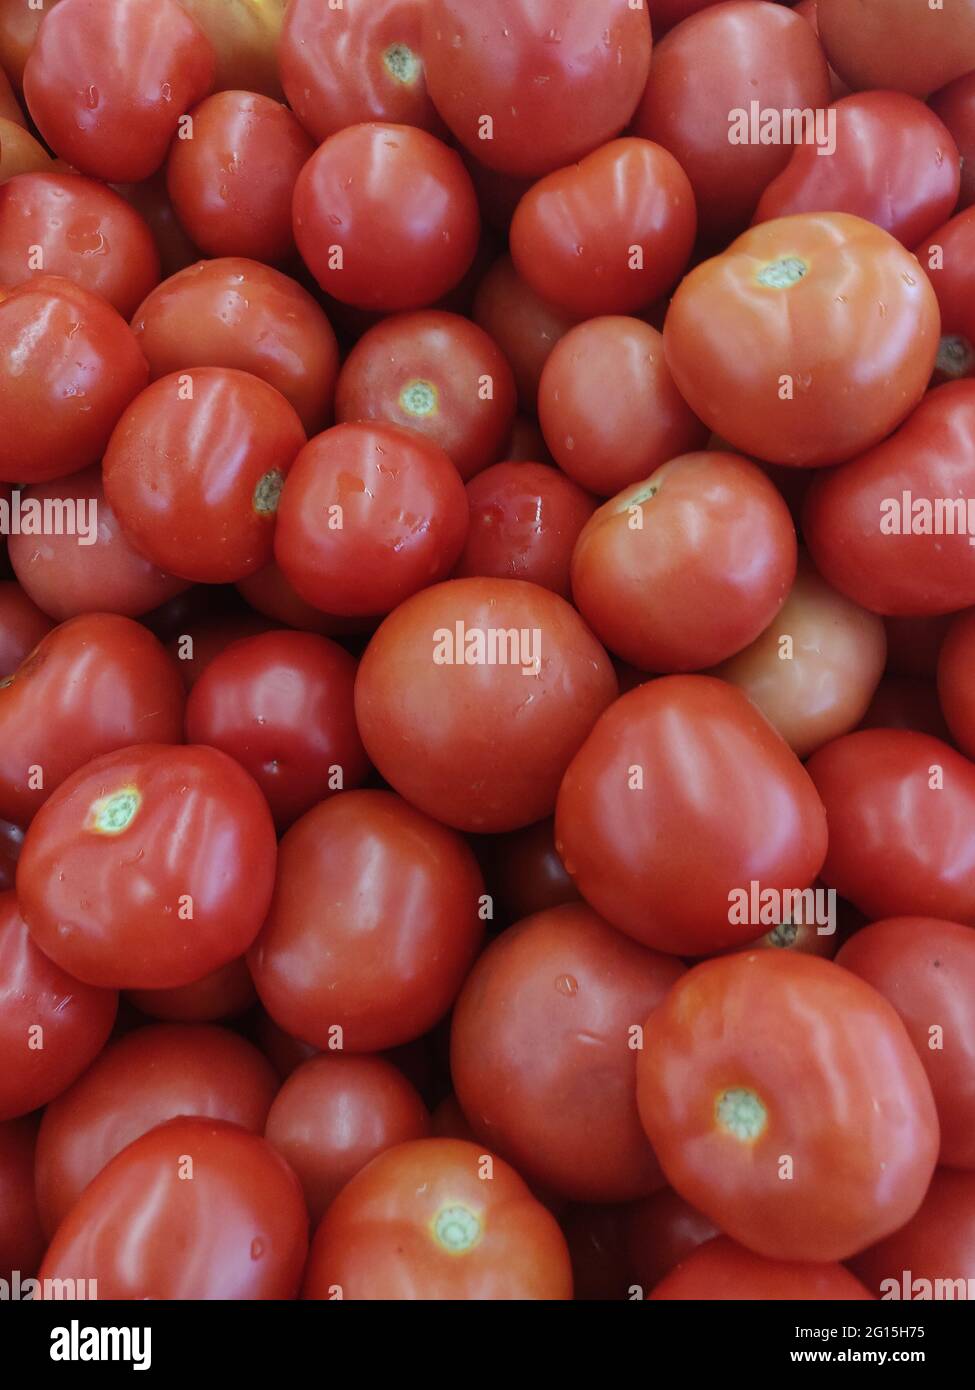 The Early Girl tomato is a medium-sized globe-type F1 hybrid popular with home gardeners because of its early ripening fruit. Stock Photo